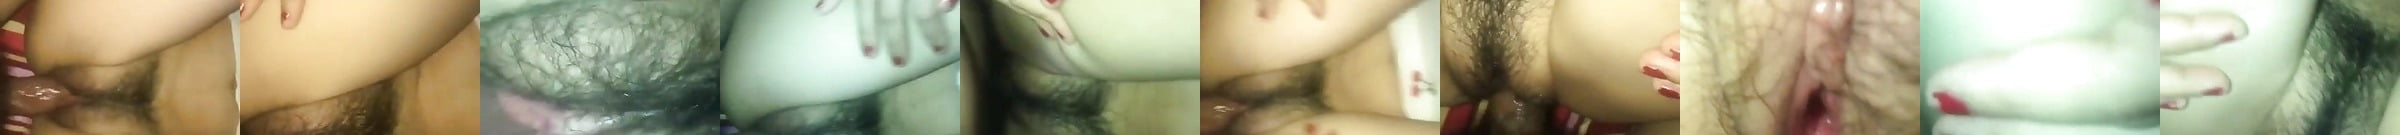 Smooth Penetration By Bbc Pov Free Motherless Tube Porn Video Xhamster